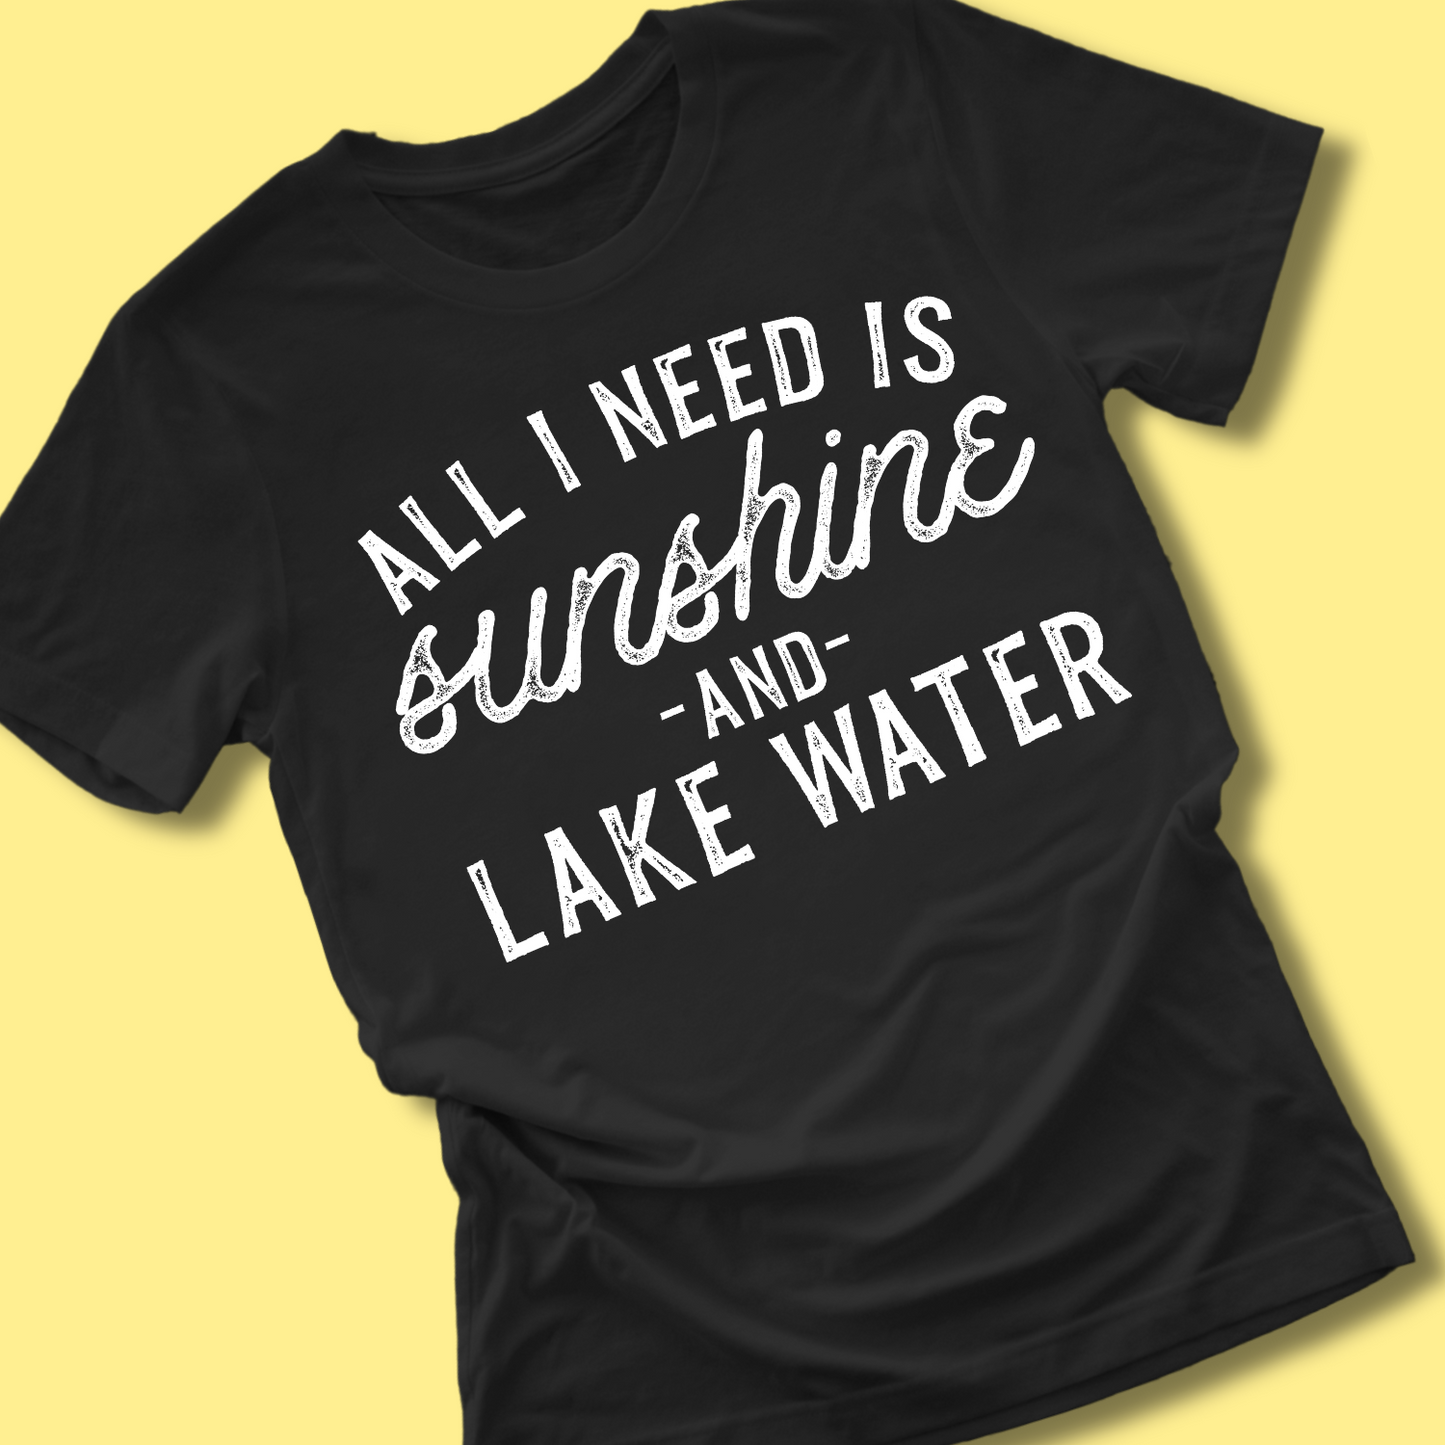 All You Need is Sunshine and Lake Water Graphic Tee